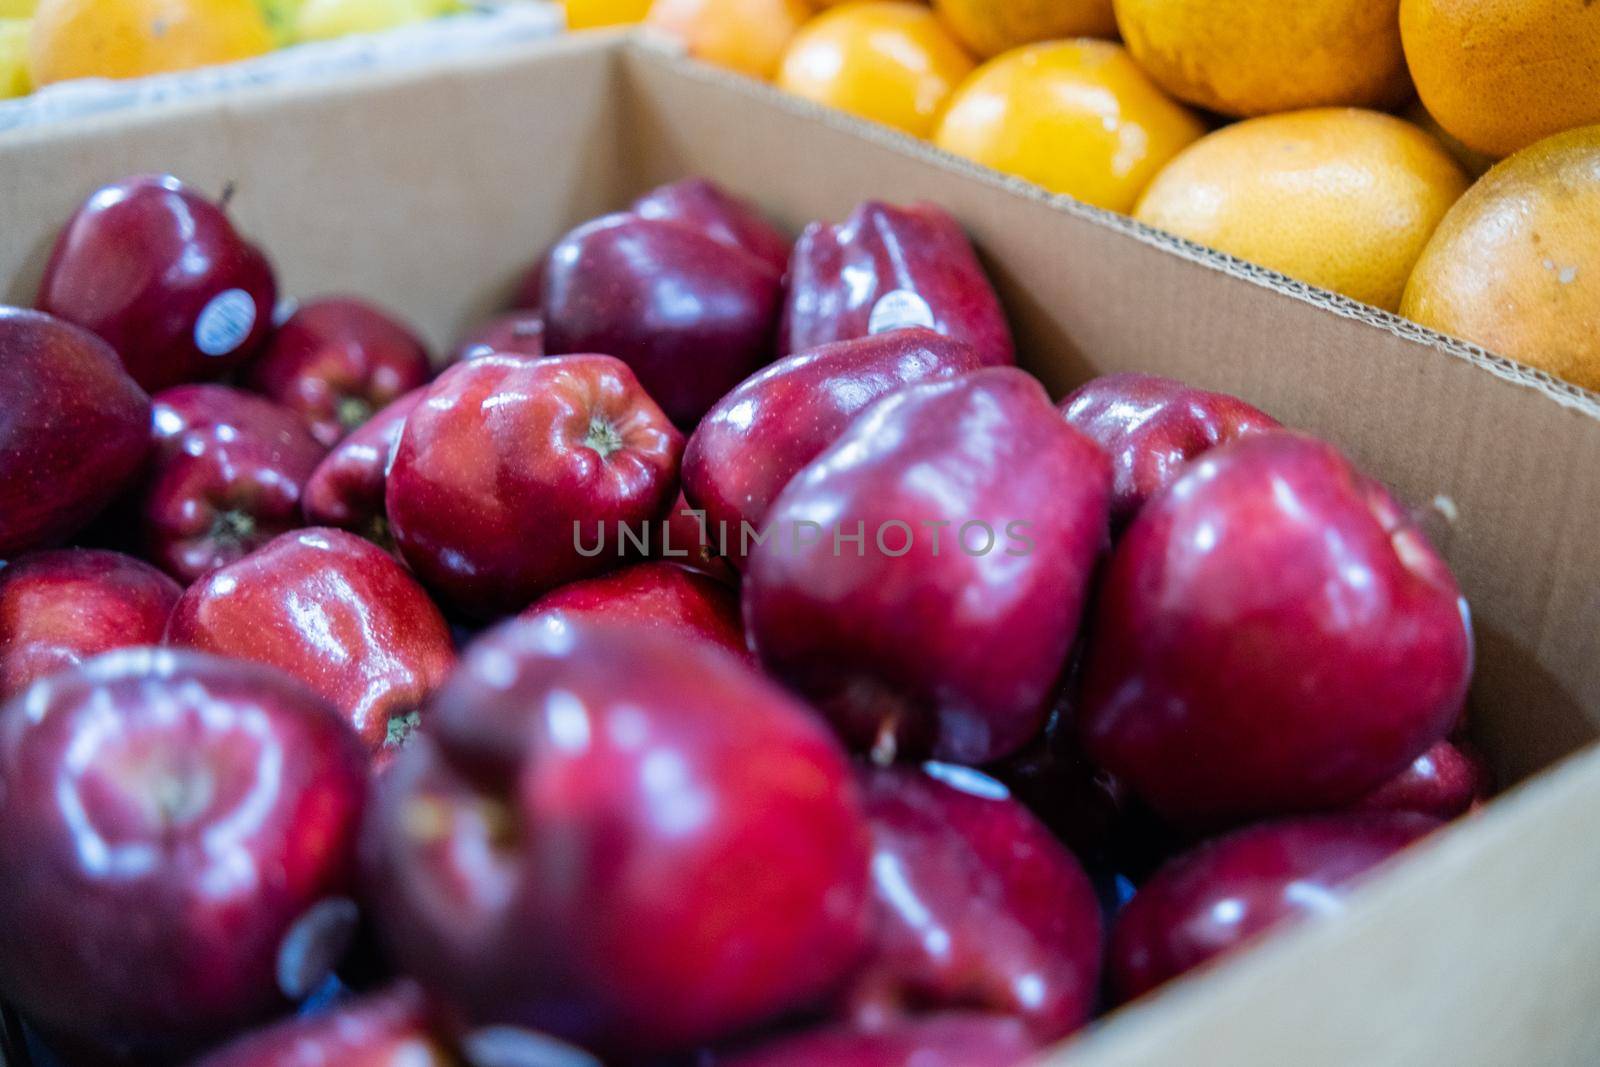 Close-up of fresh red apples in cardboard box next to pile of oranges. Juicy-looking fruit for sale on stand inside classic Mexican market. Natural healthy food